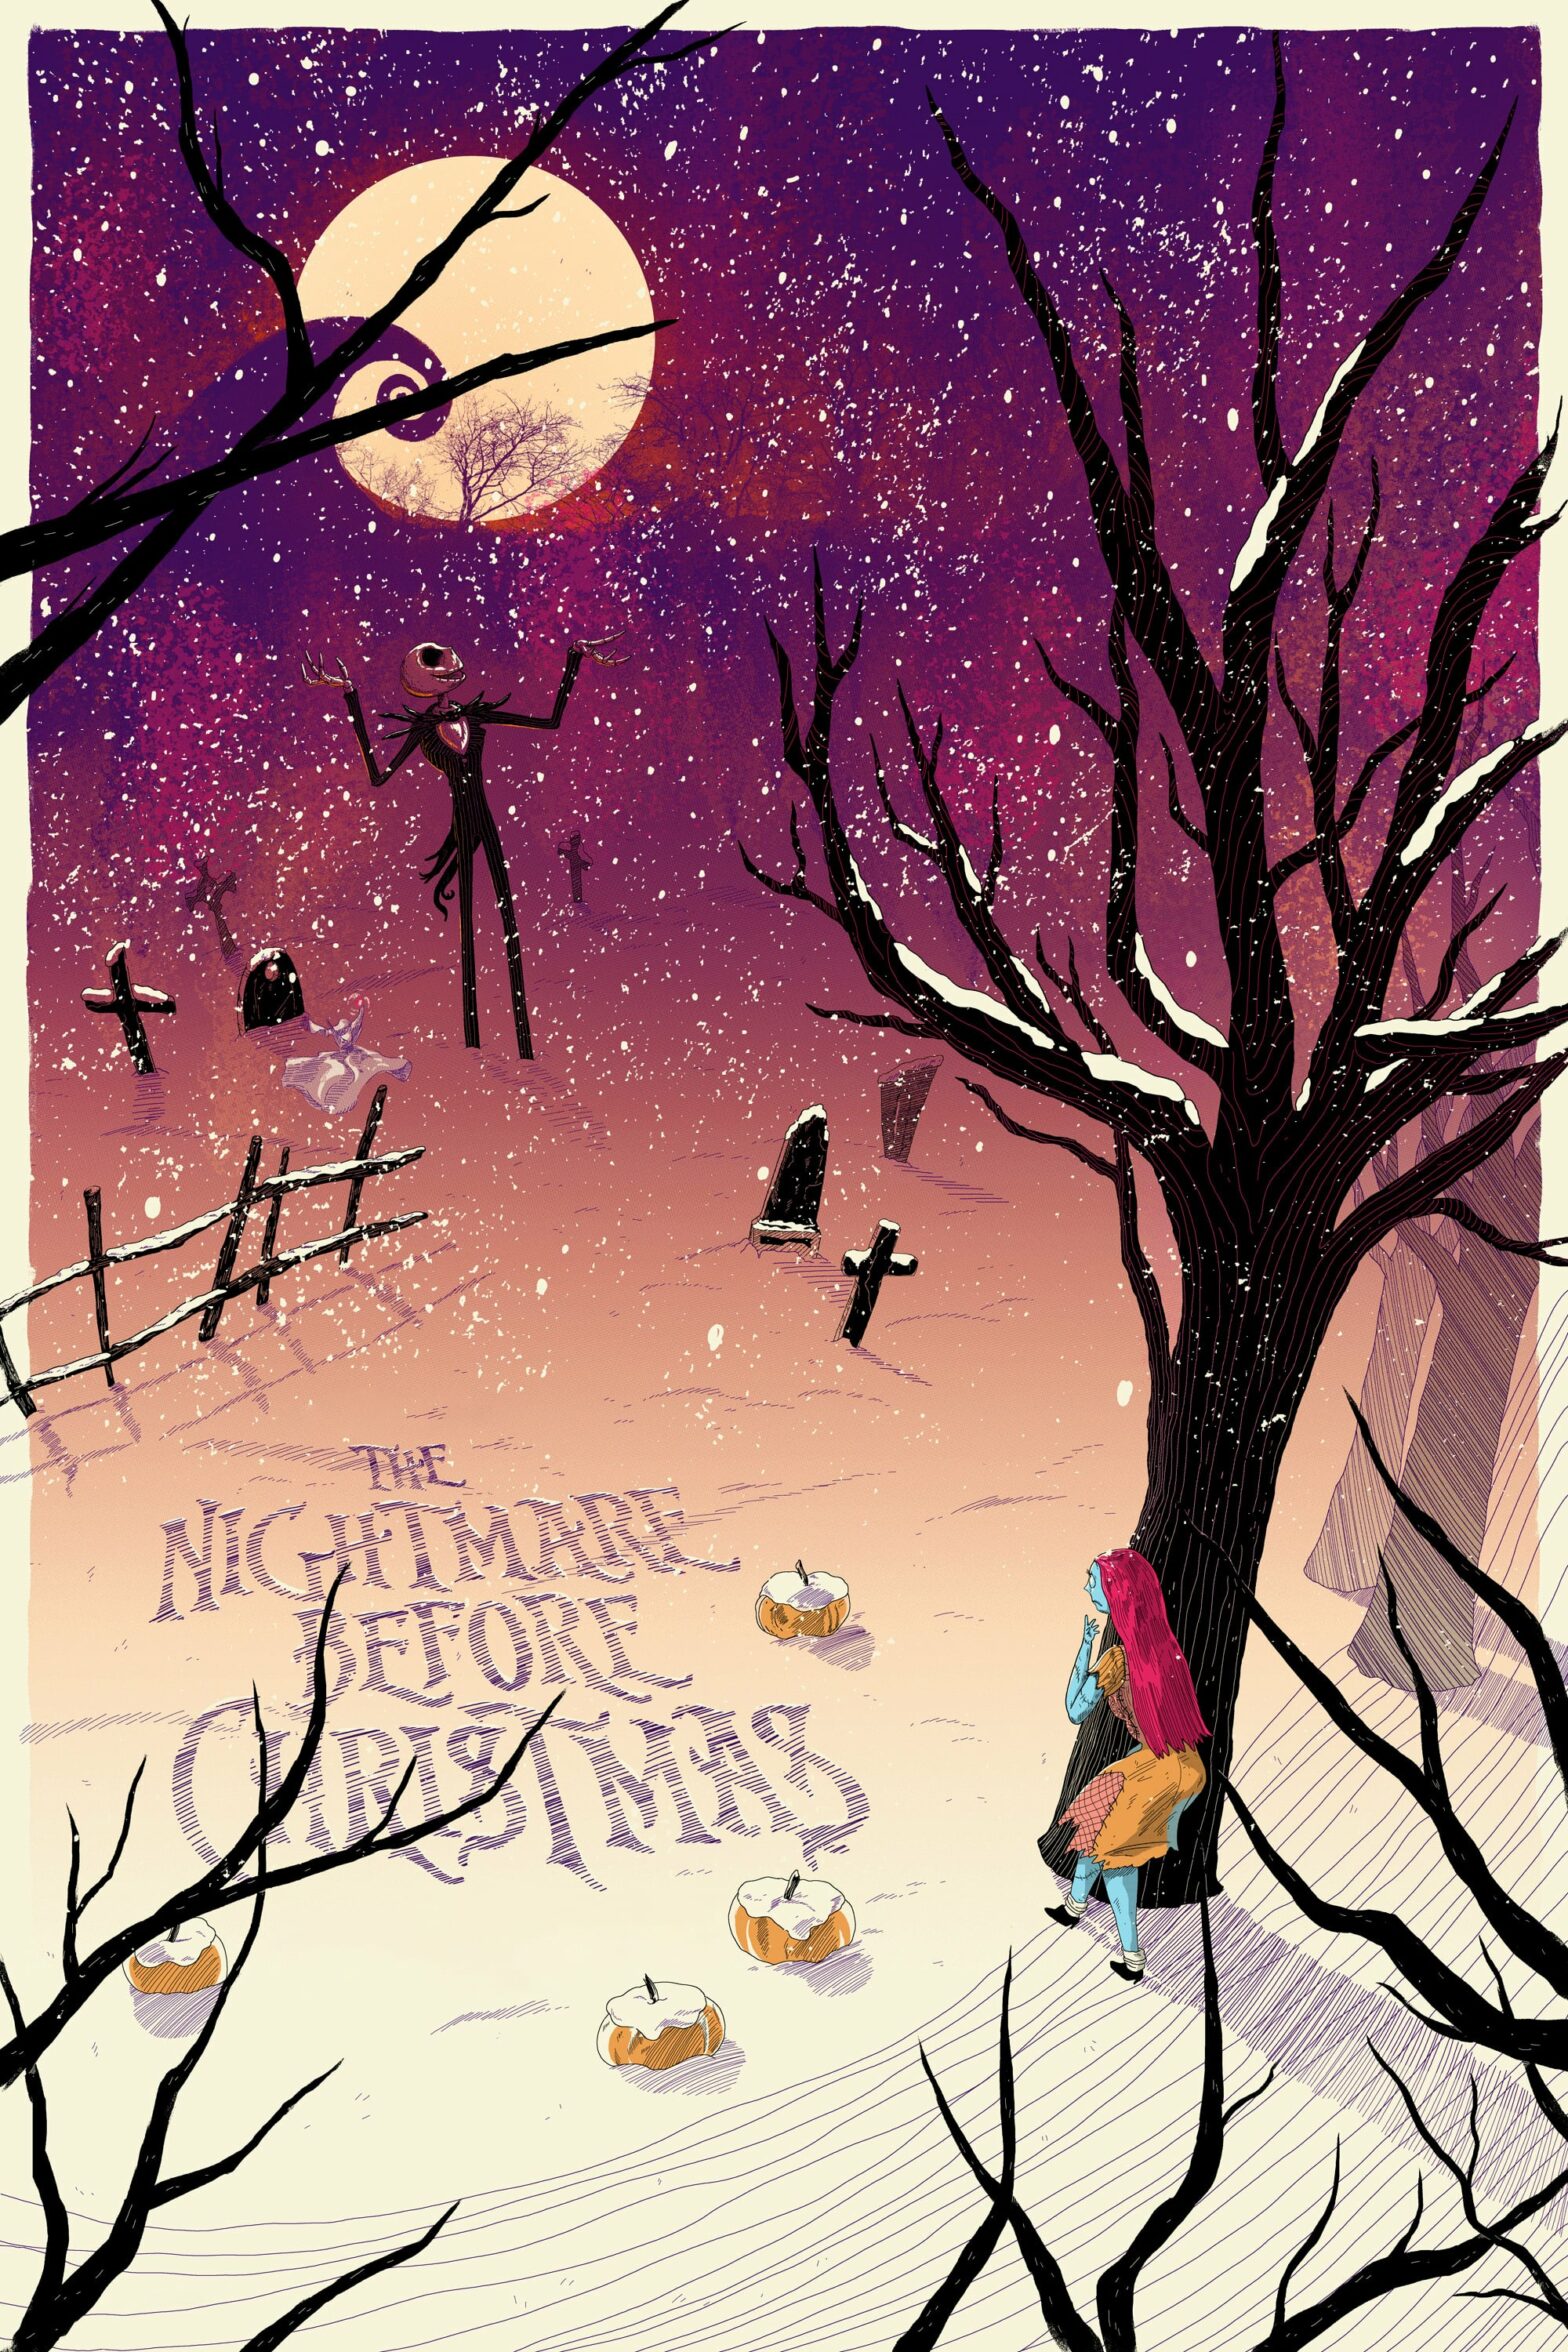 Poster for the movie "The Nightmare Before Christmas"